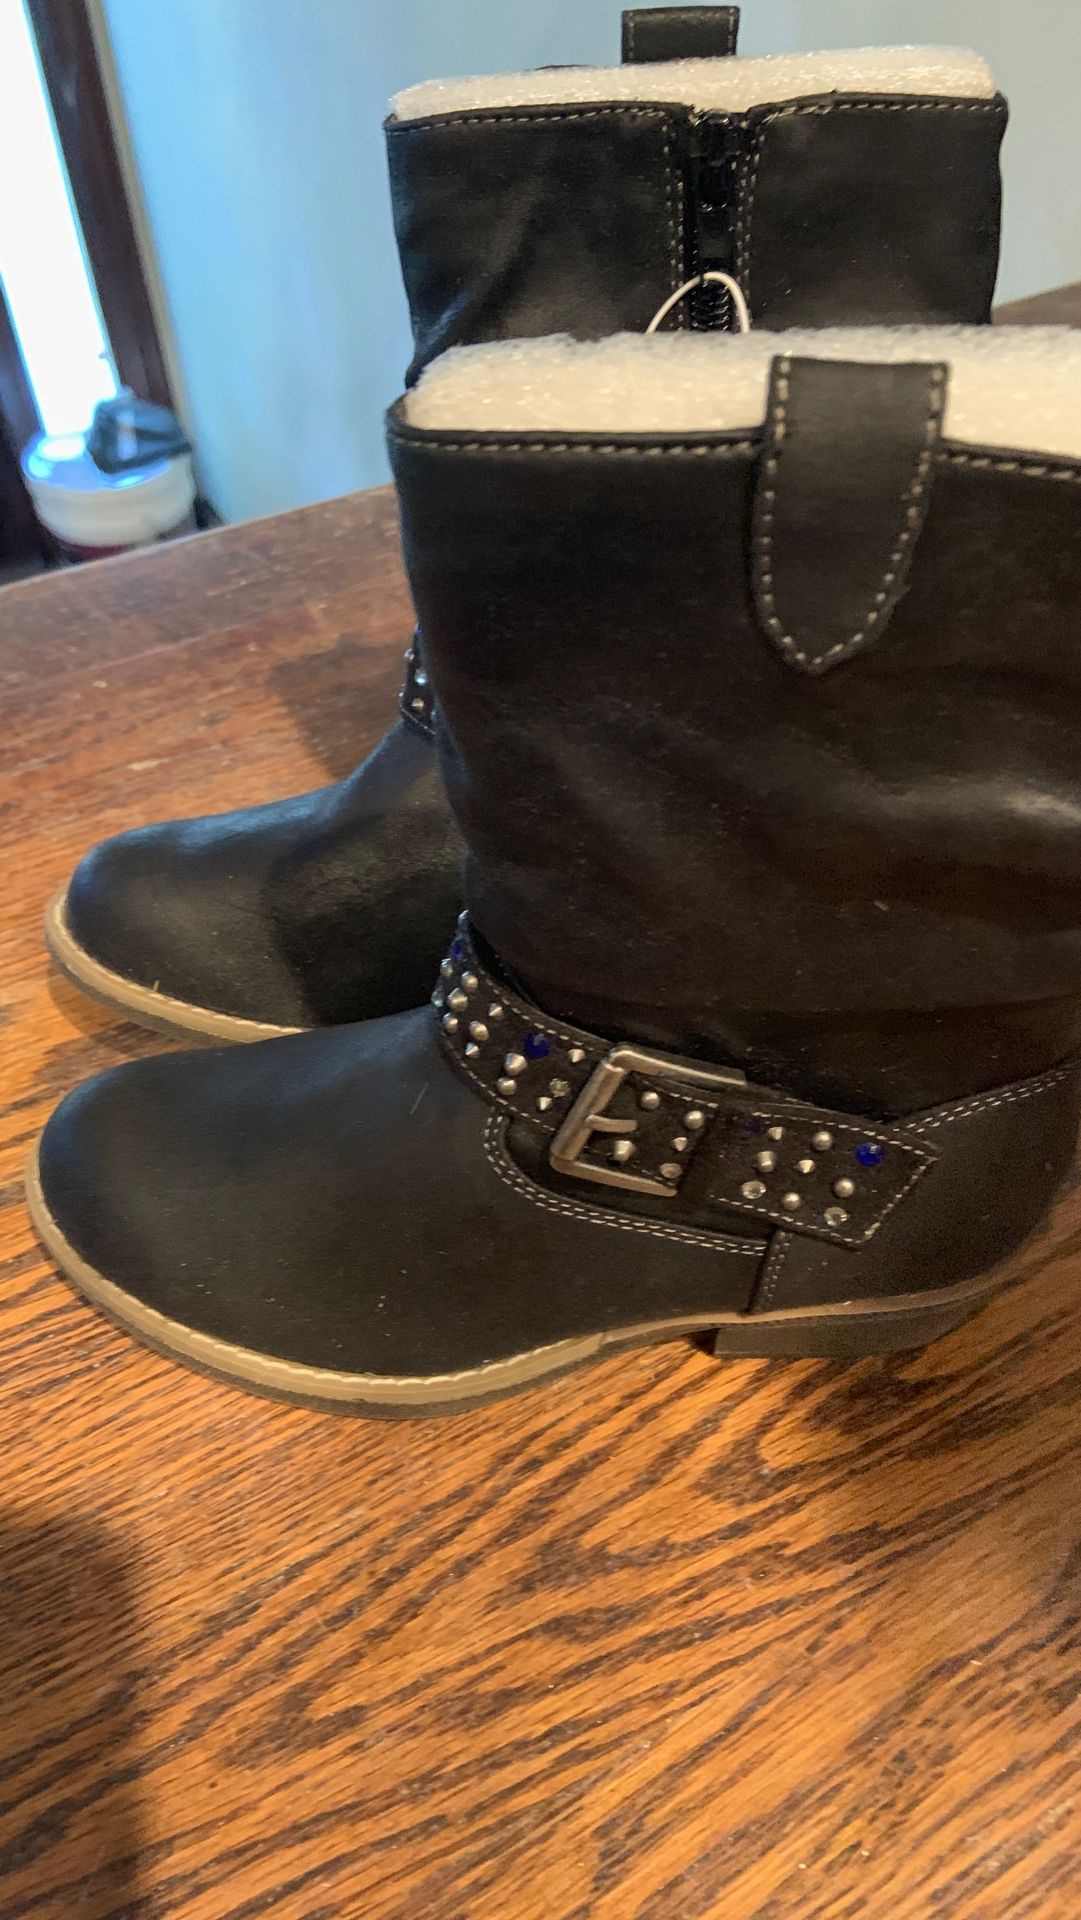 Toddler size 12 boots NWT